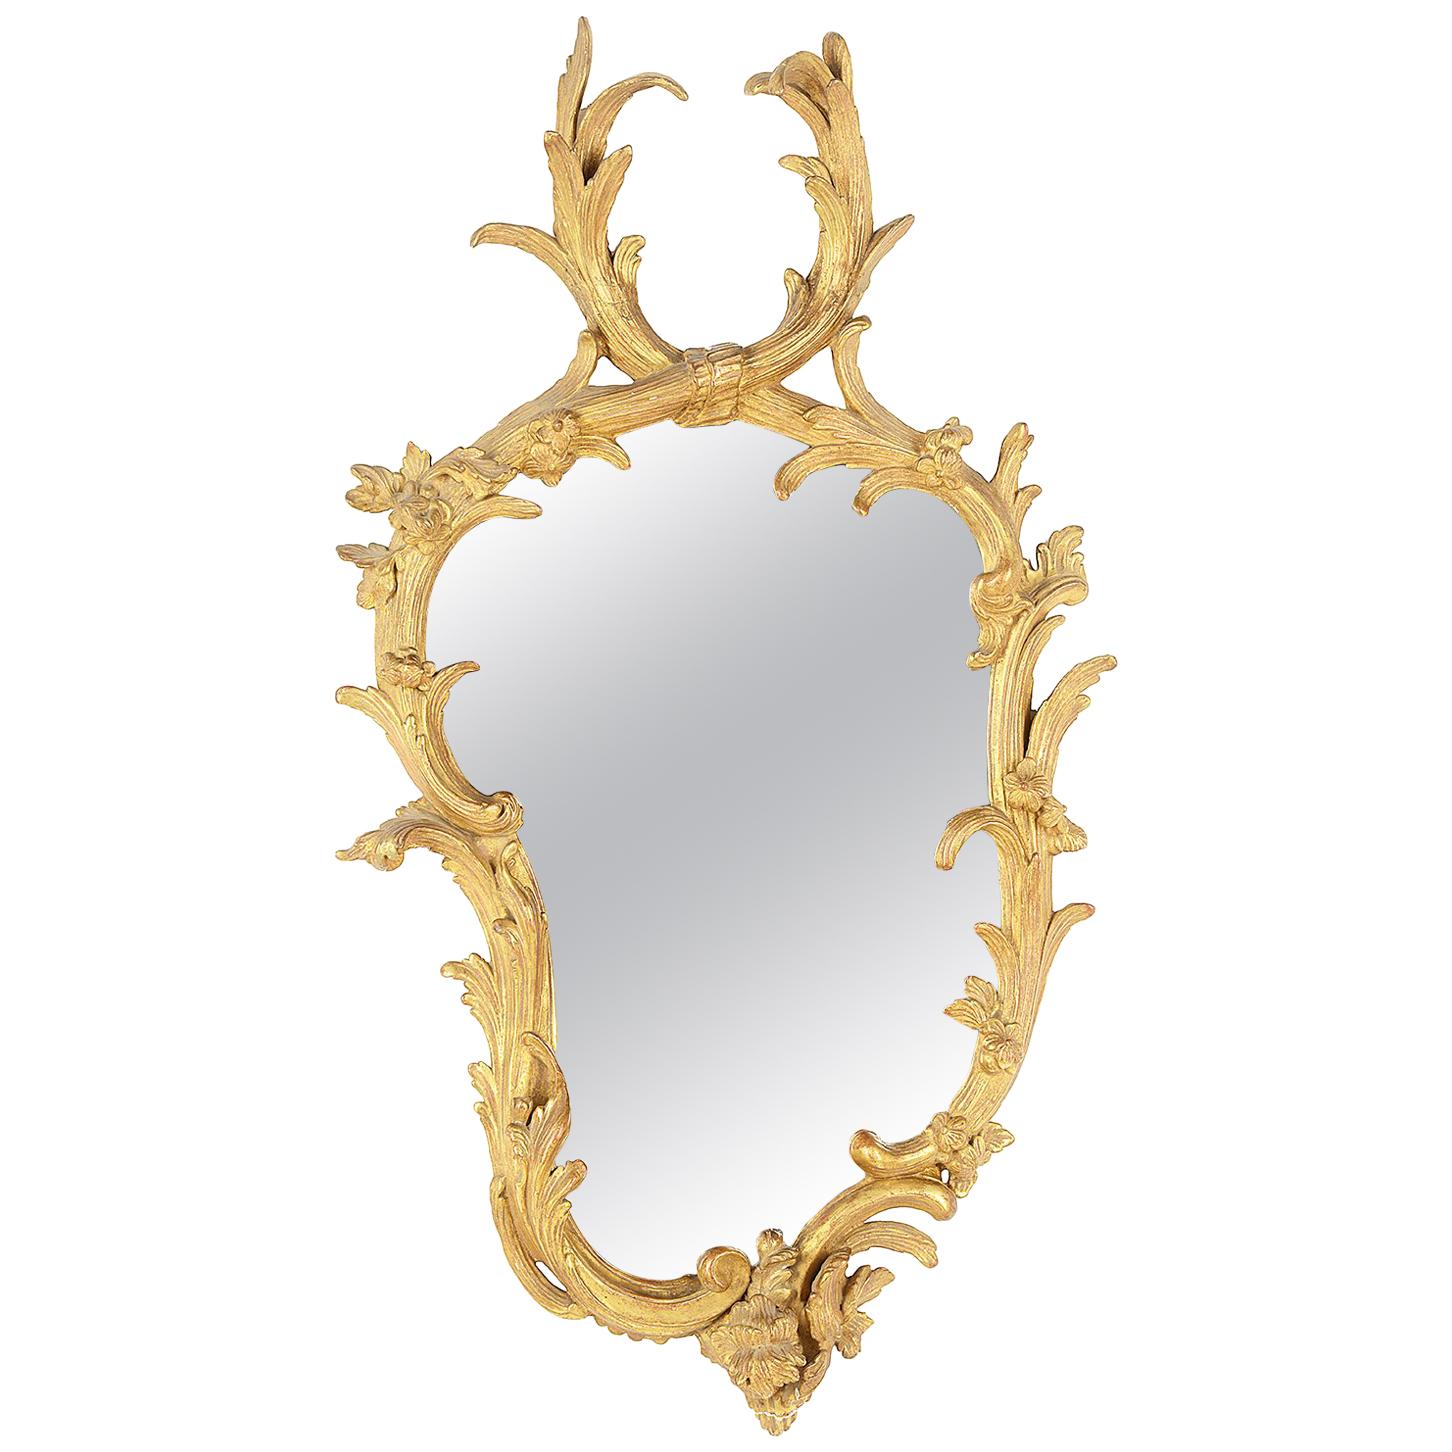 Chippendale Period Wall Mirror, 18th Century For Sale